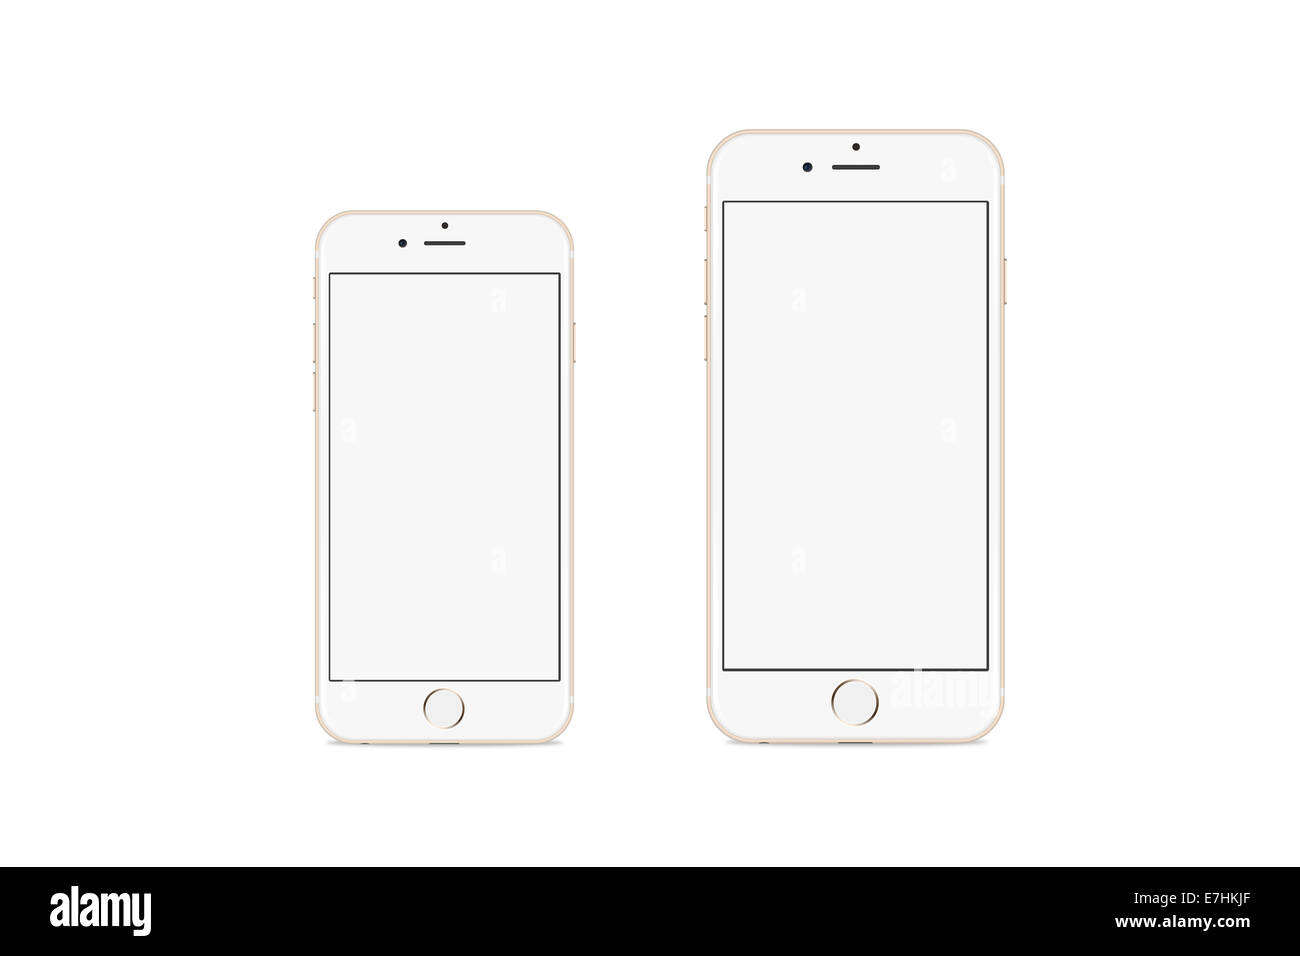 Digitally generated image of cell phone, iphone 6 and iphone 6 plus, silver. Stock Photo